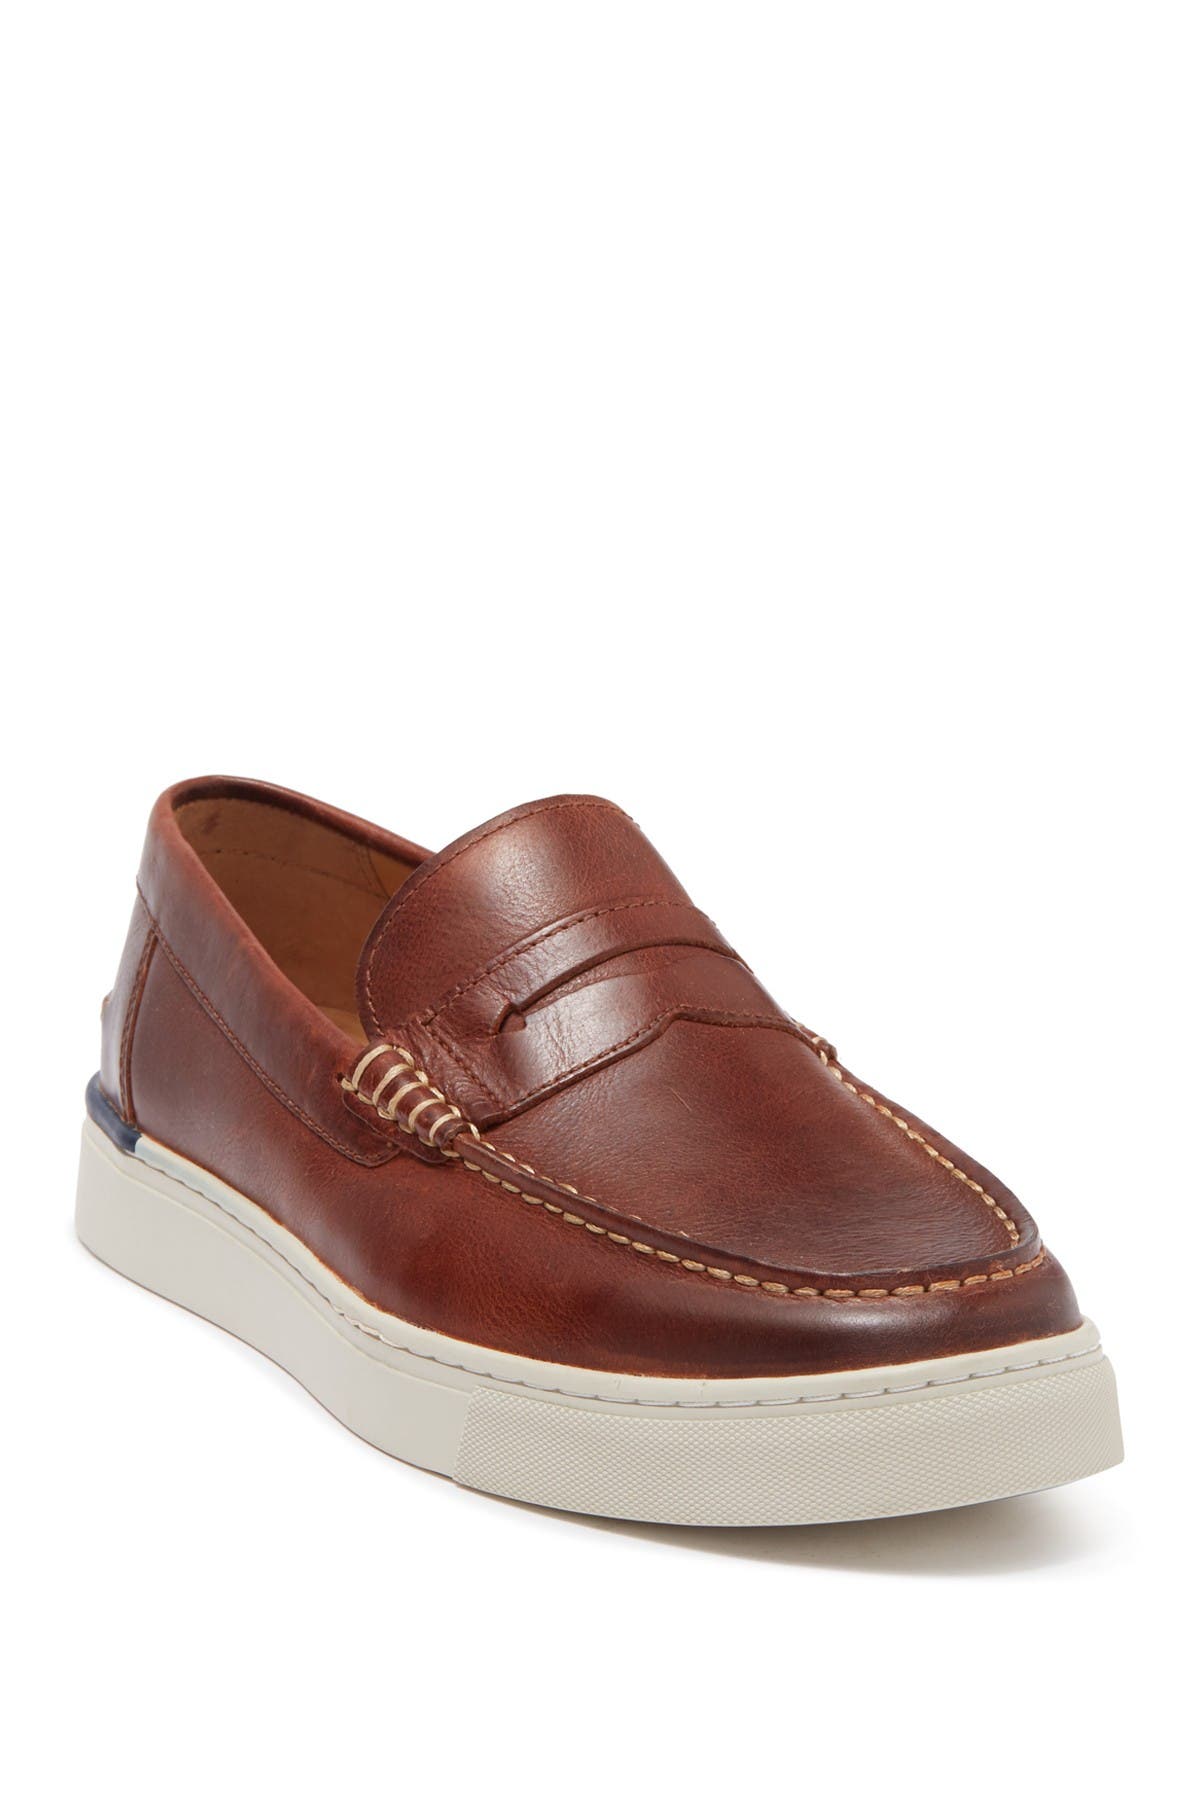 sperry gold cup loafer